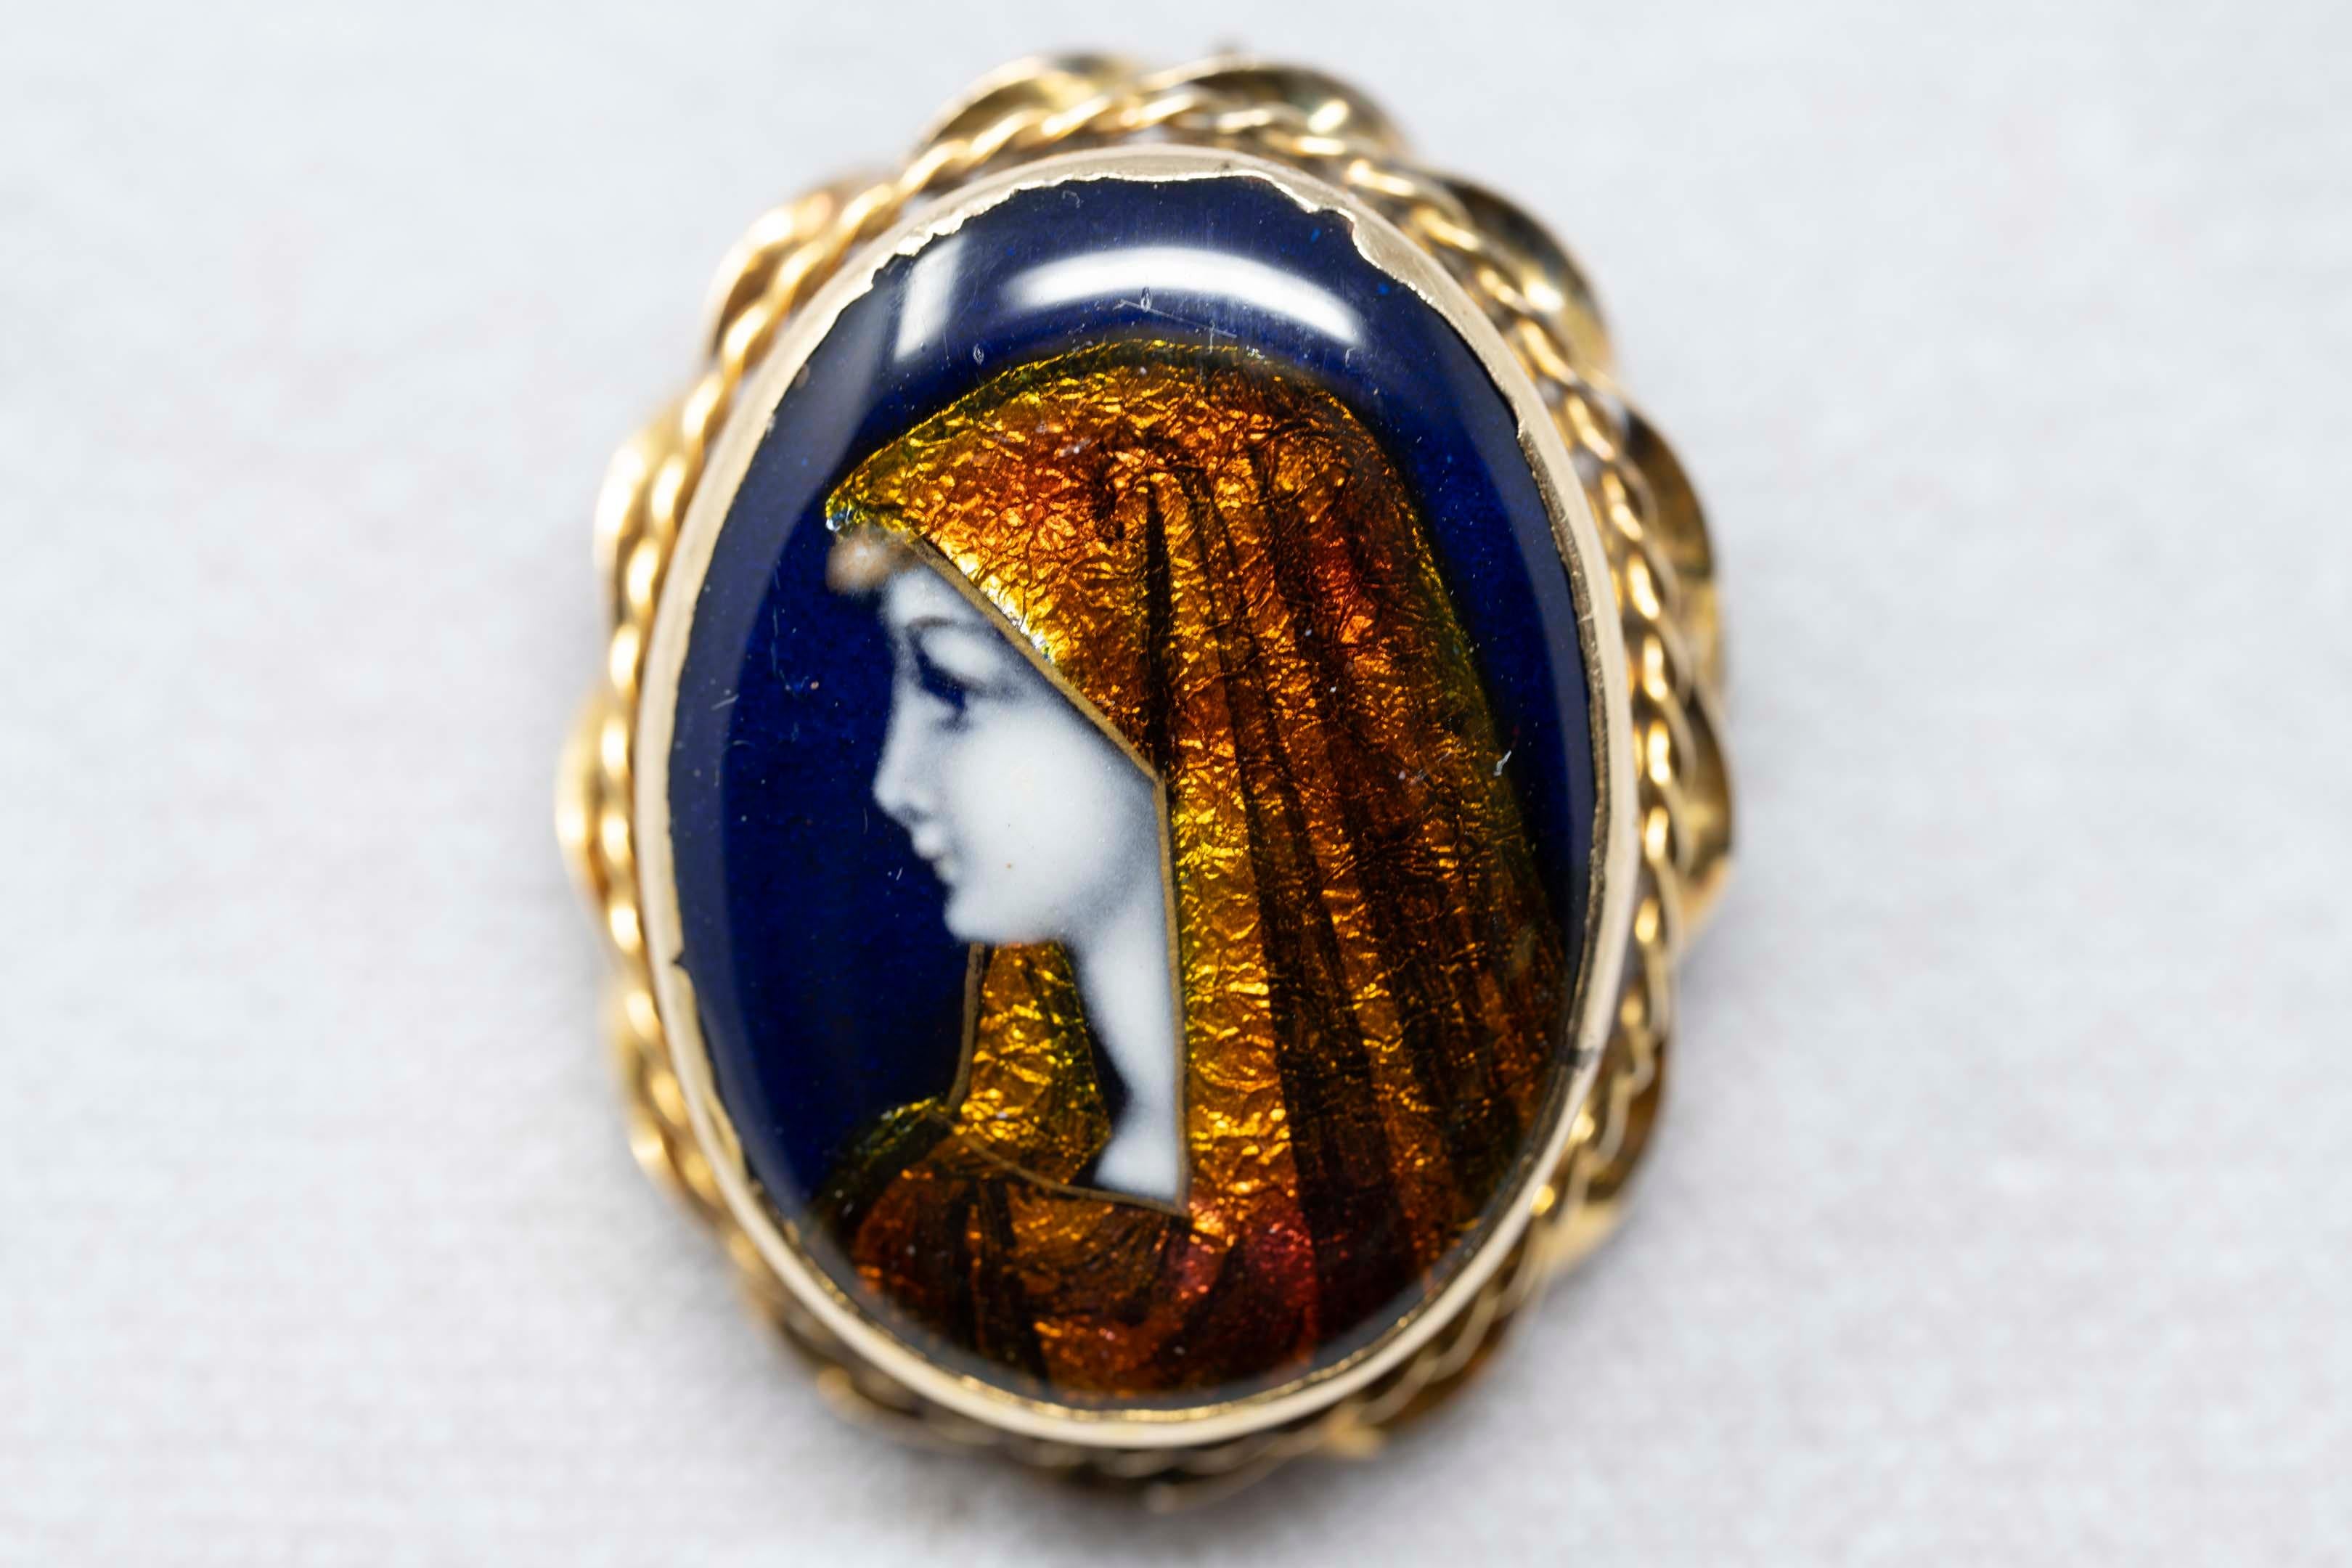 Antique French enamel brooch, depicting the Fabiola portrait signed Gamet France on 10k gold frame. Signed on the back, circa 1900. In good condition, dimensions 29mm x 23mm.
